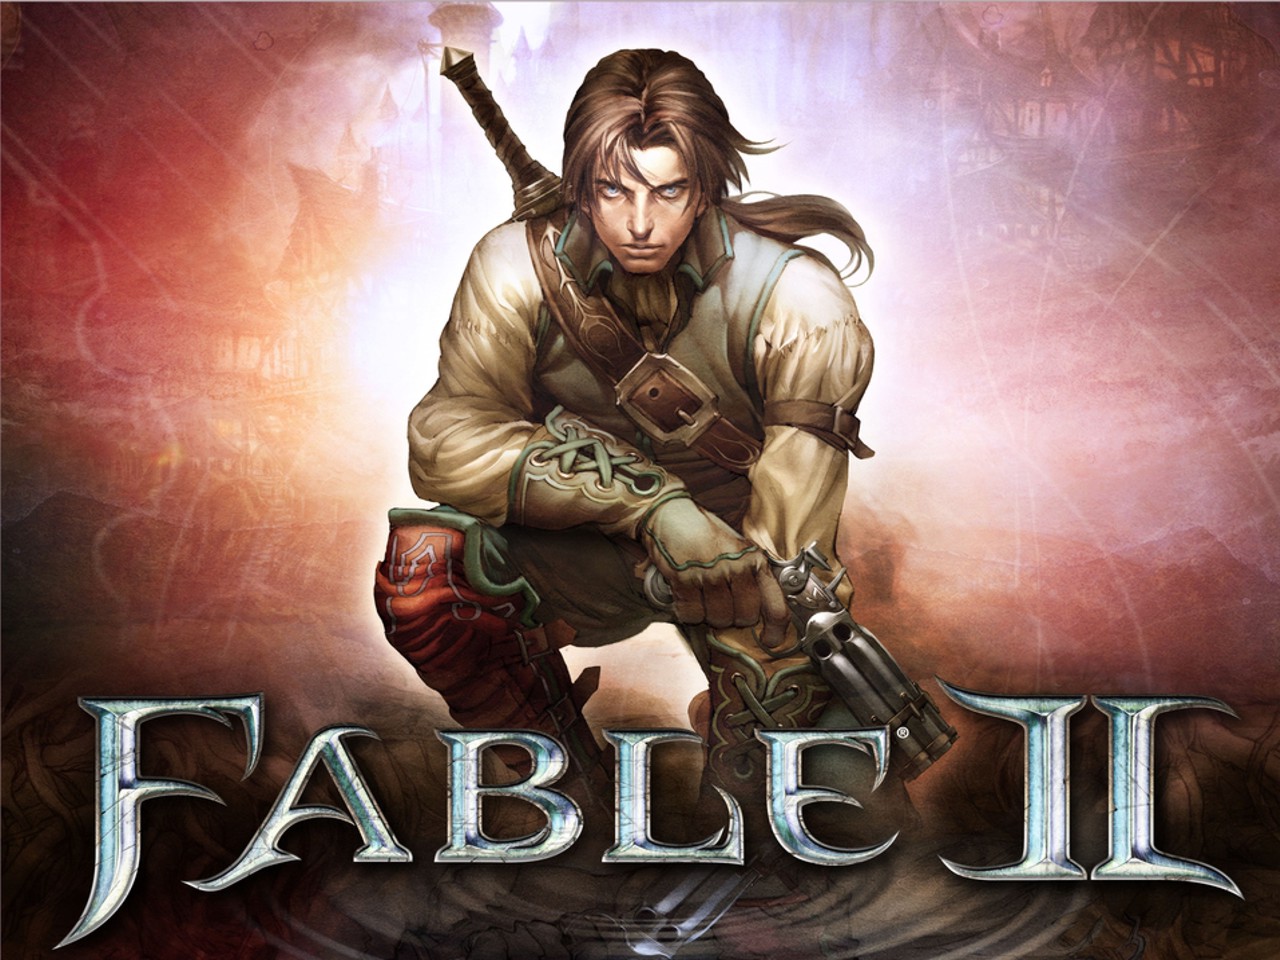 Download full size Fable 2 wallpaper / Games / 1280x960